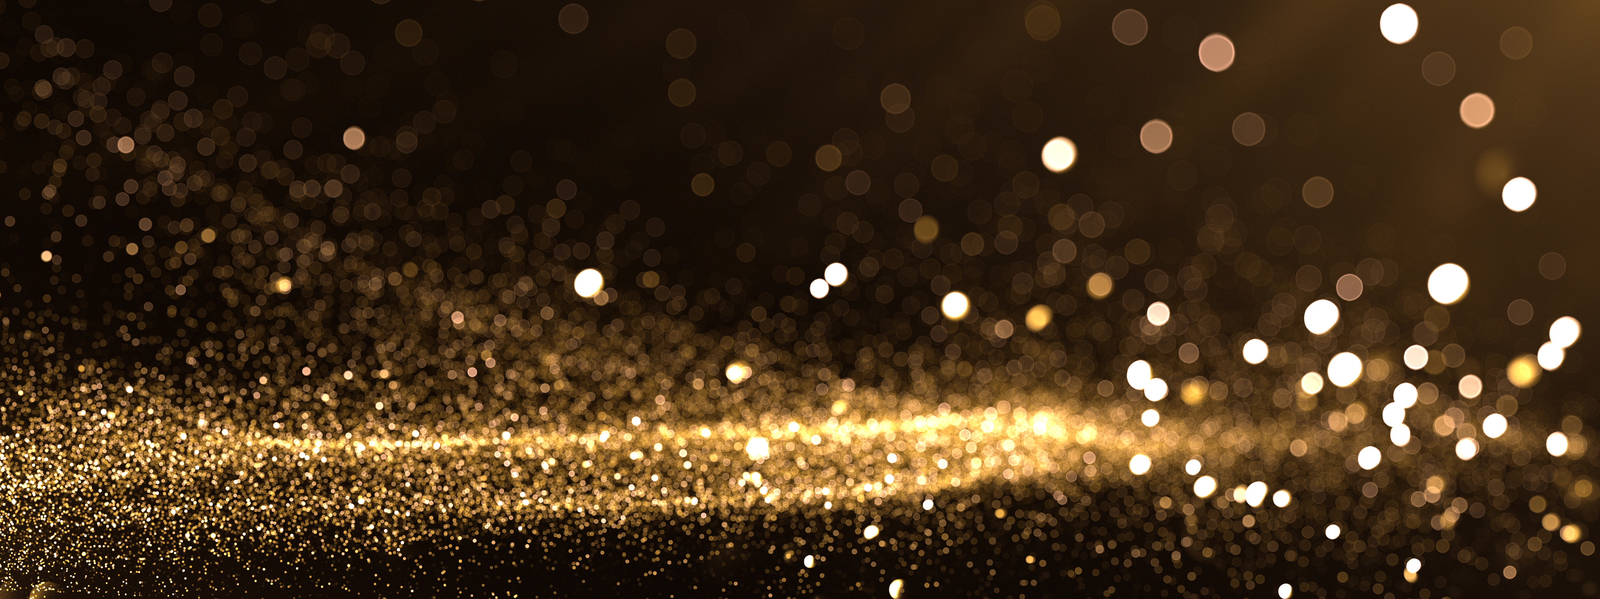 Elegant Gold Background For Christmas And Other Celebrations